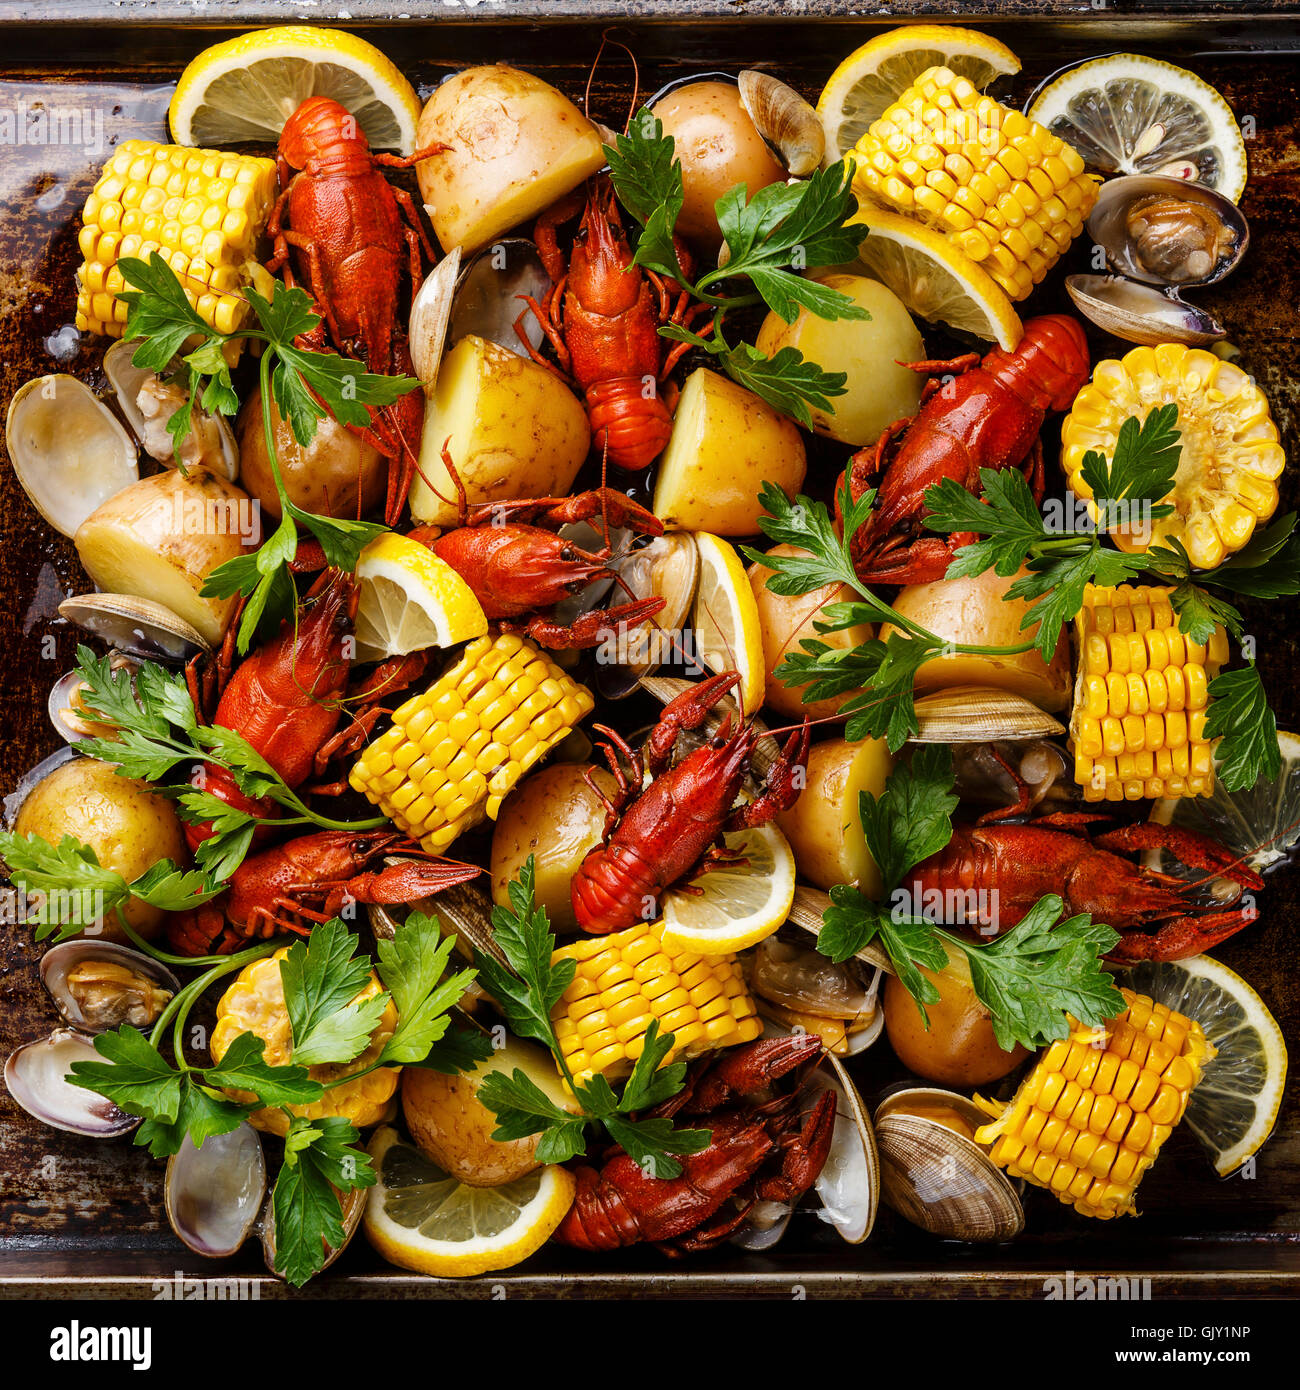 Clambake Seafood boil with boiled Crayfish, Corn on the Cob, Potatoes and Clams Stock Photo